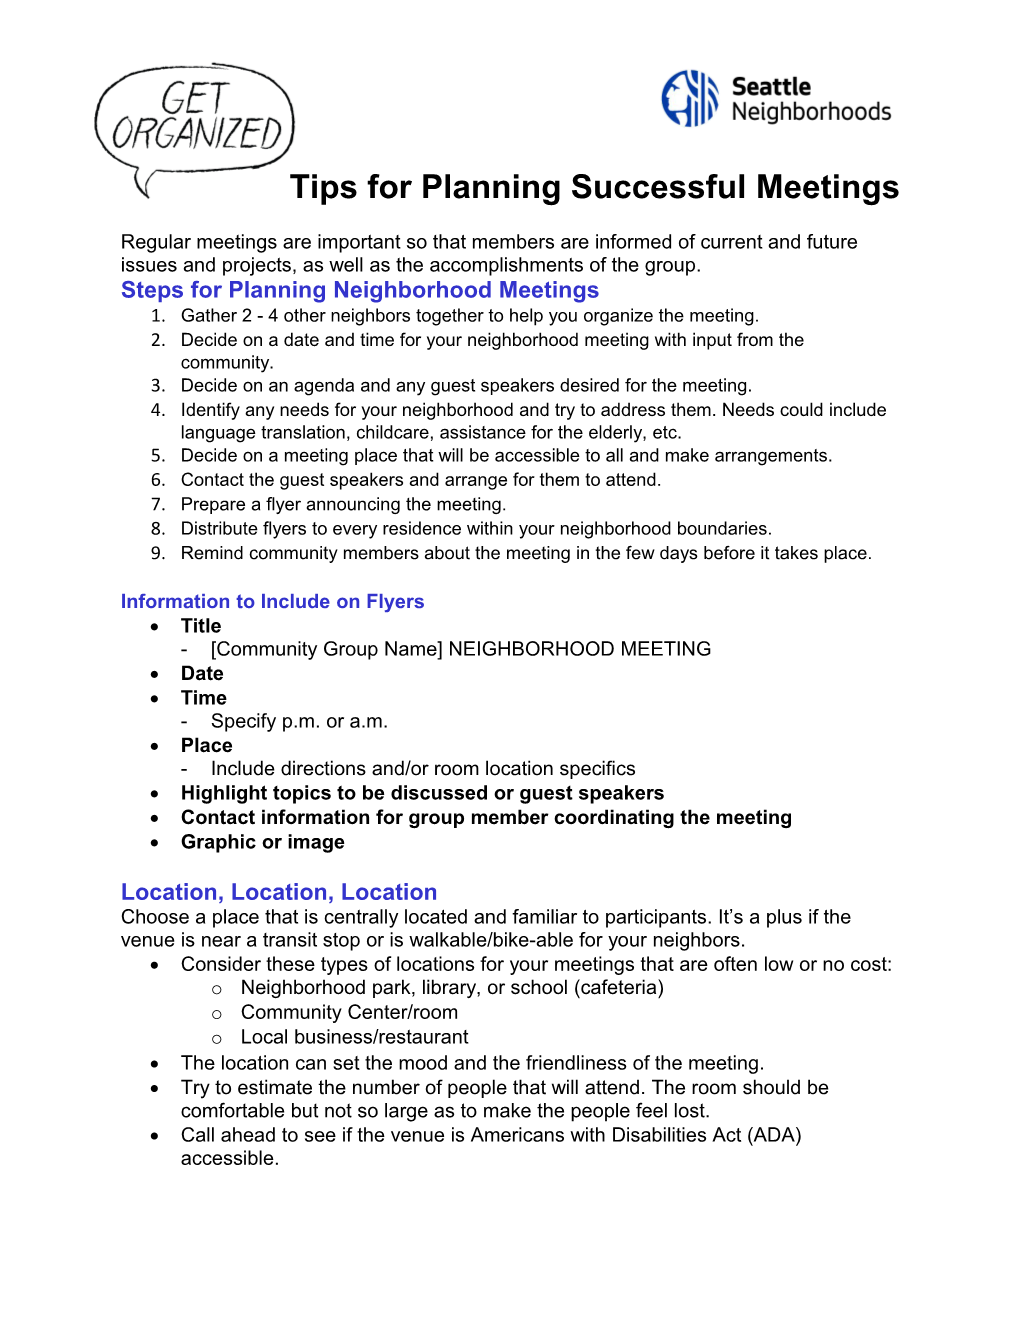 Tips for Planning Meetingspage 1